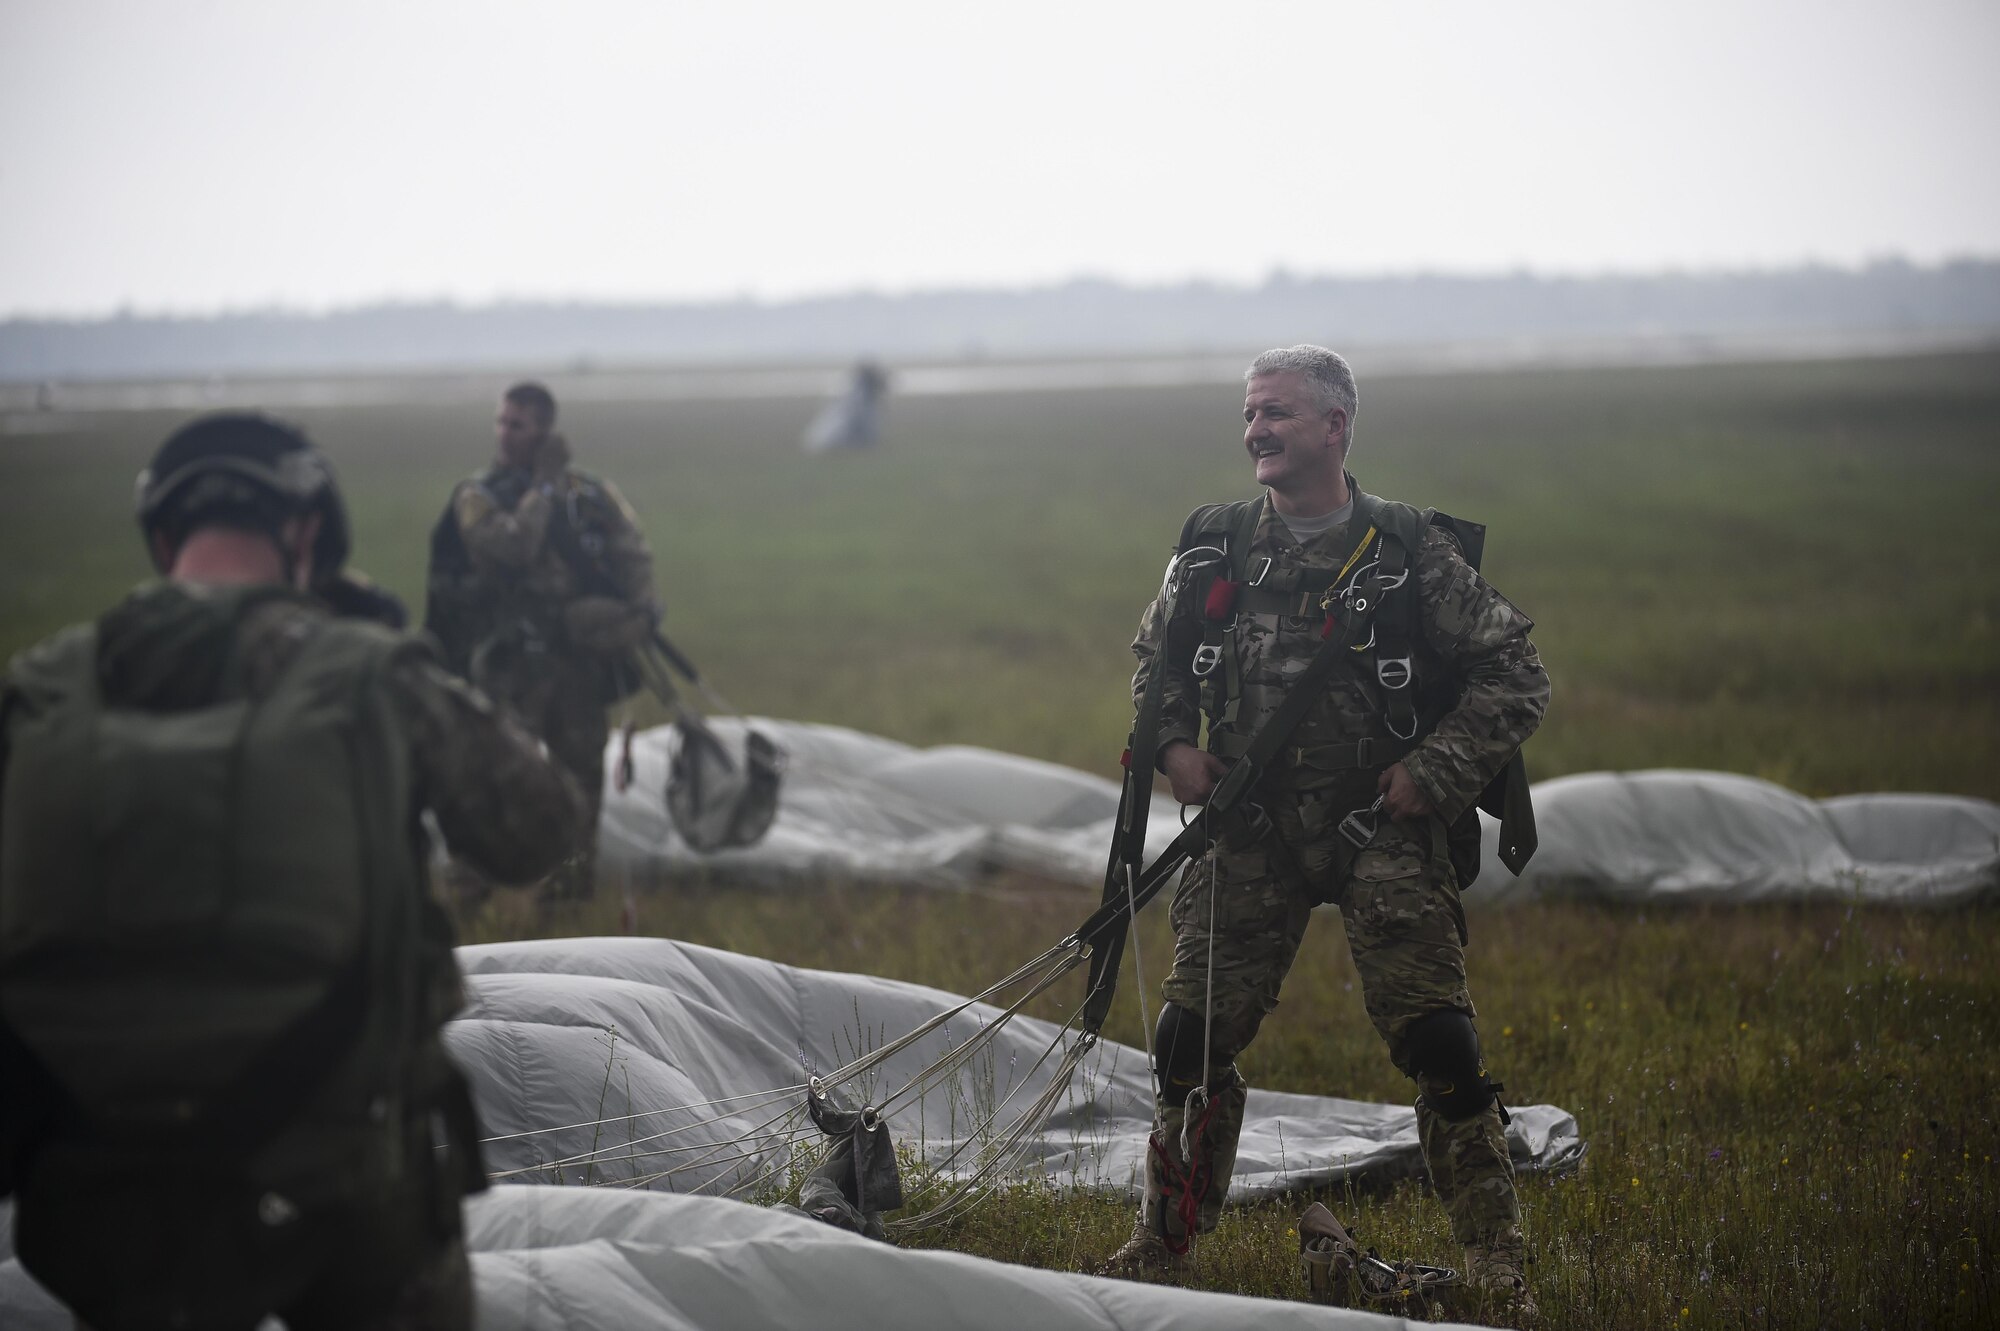 Chief Master Sgt. Bruce Dixon, the command chief master sergeant of the 24th Special Operations Wing, gathers a parachute after conducting his final military jump at Hurlburt Field, Fla., May 3, 2016. Dixon, who is retiring after a 30-year career as a combat controller, is one of a handful of military members to complete three free-fall jumps into combat since the Vietnam War. (U.S. Air Force photo by Airman 1st Class Kai White) 